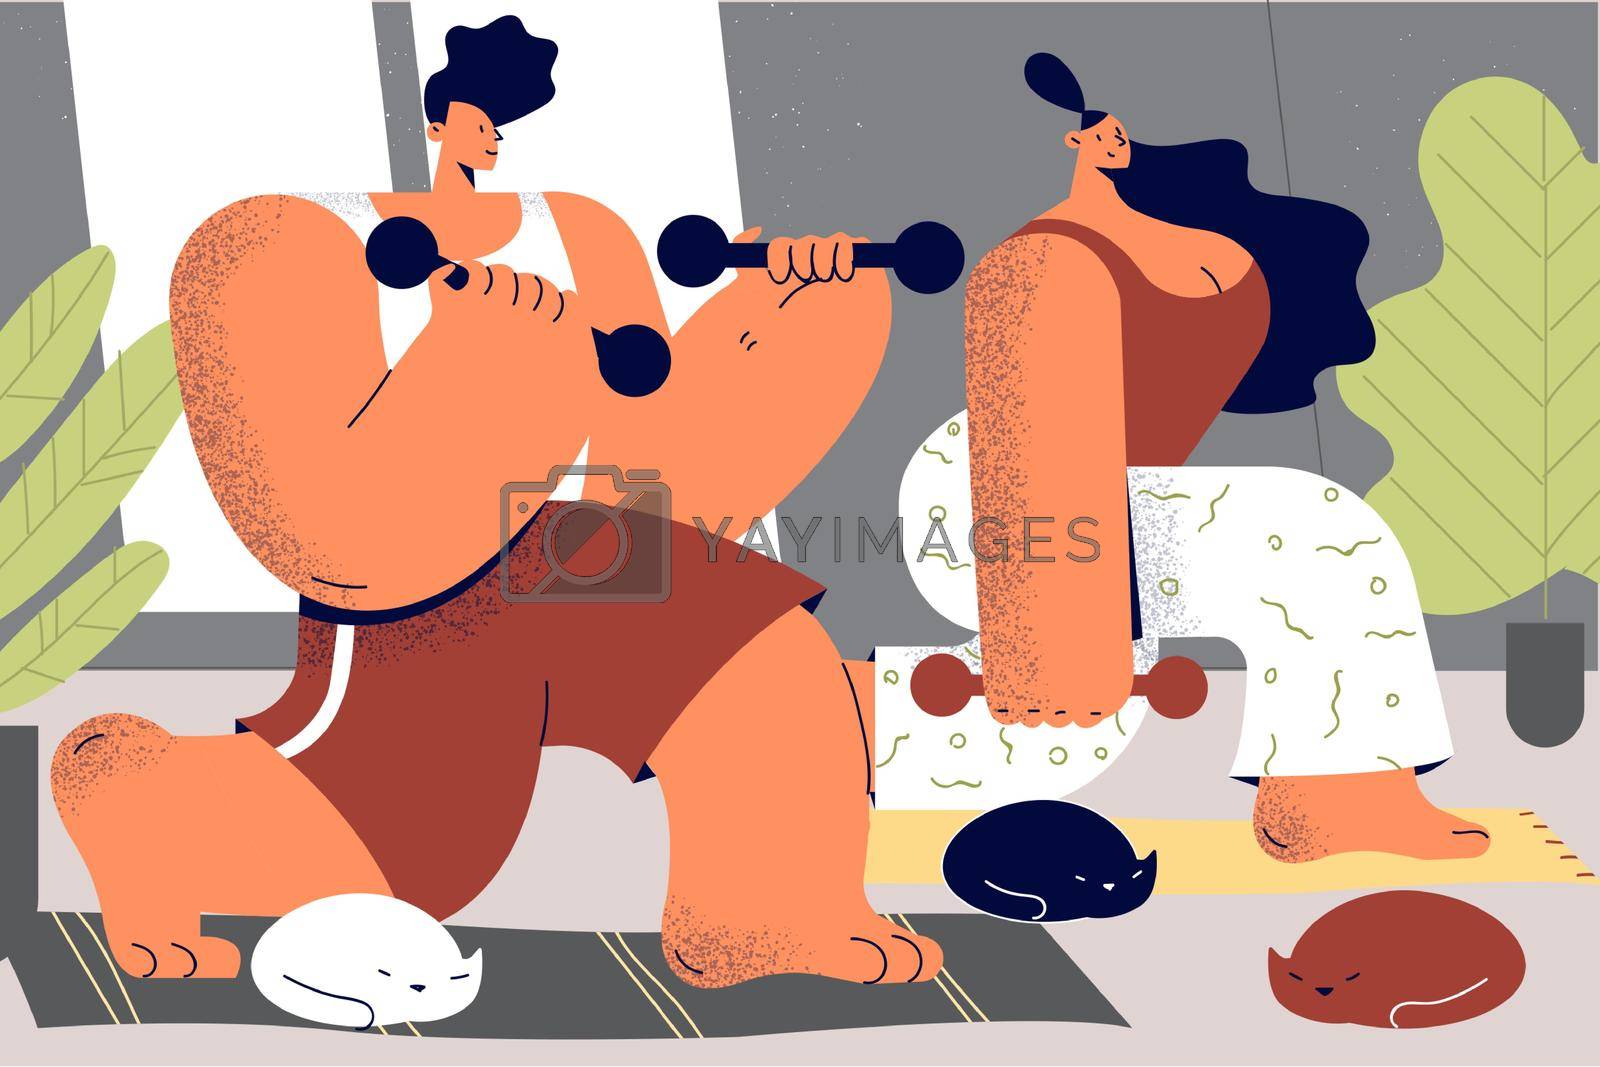 Healthy lifestyle and workout at home concept. Young positive couple cartoon characters doing exercise with dumbbells training together at home practicing workout in pair vector illustration